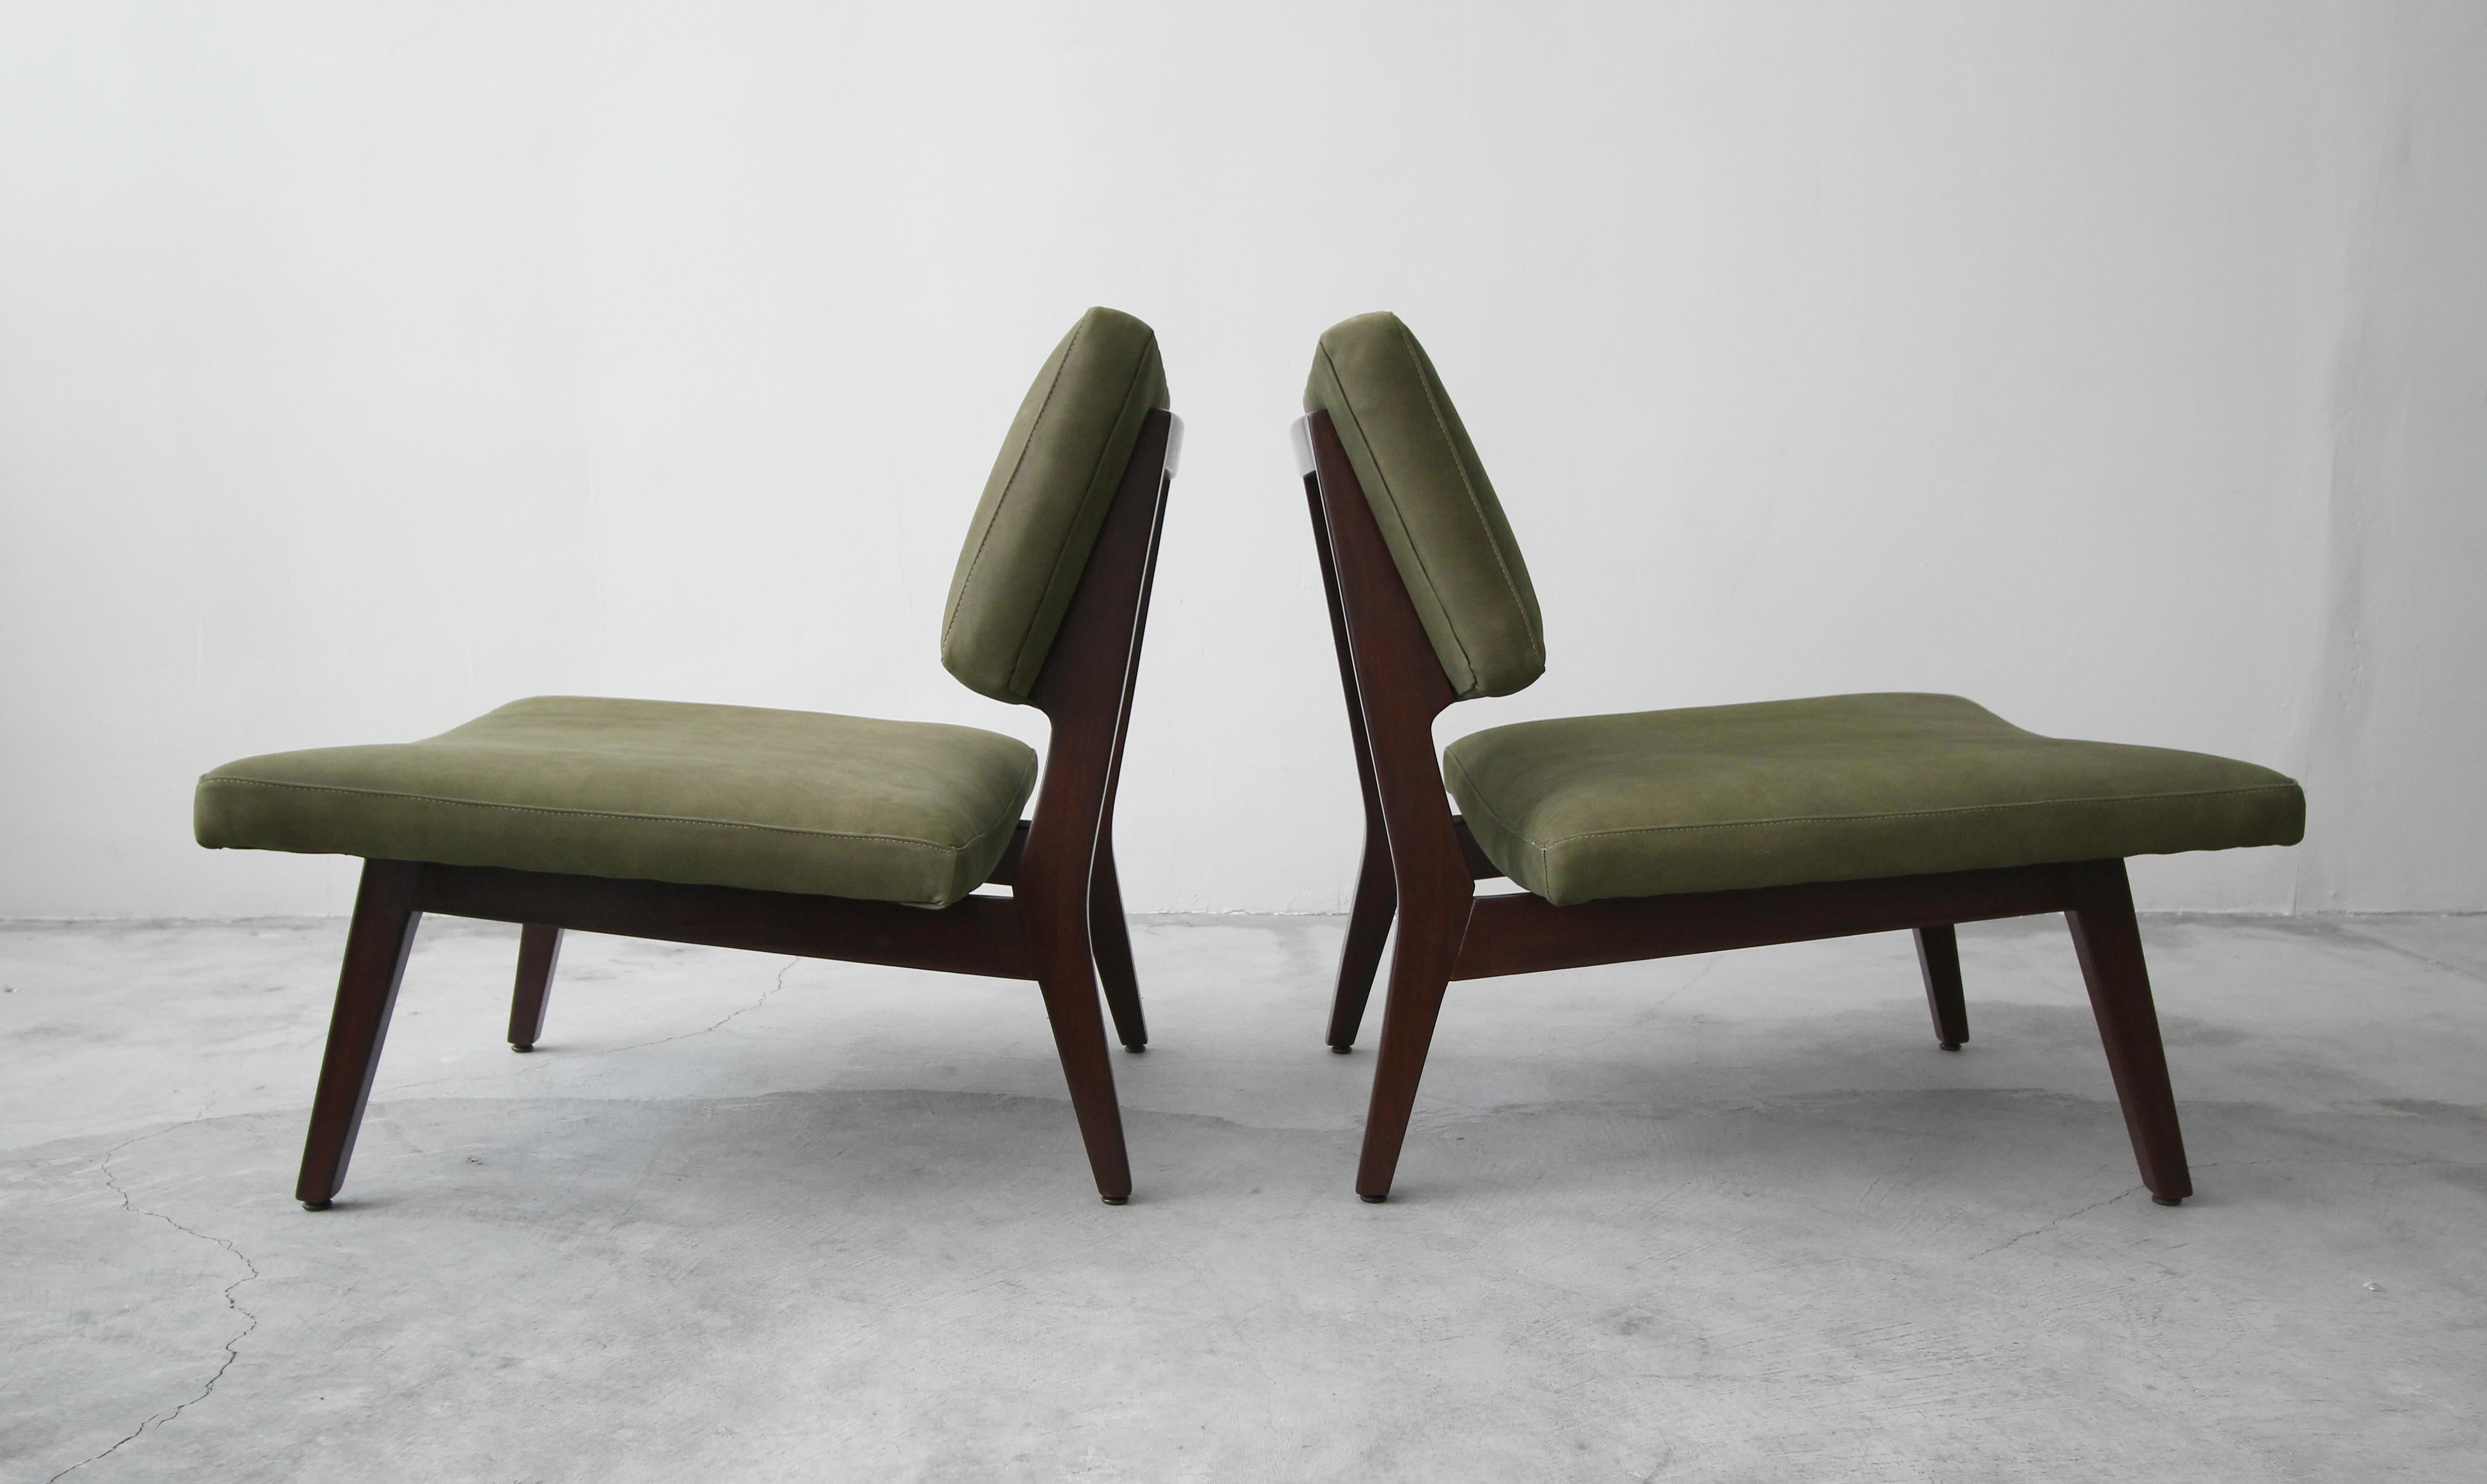 Pair of Midcentury Walnut and Leather Slipper Lounge Chairs by Jens Risom 1